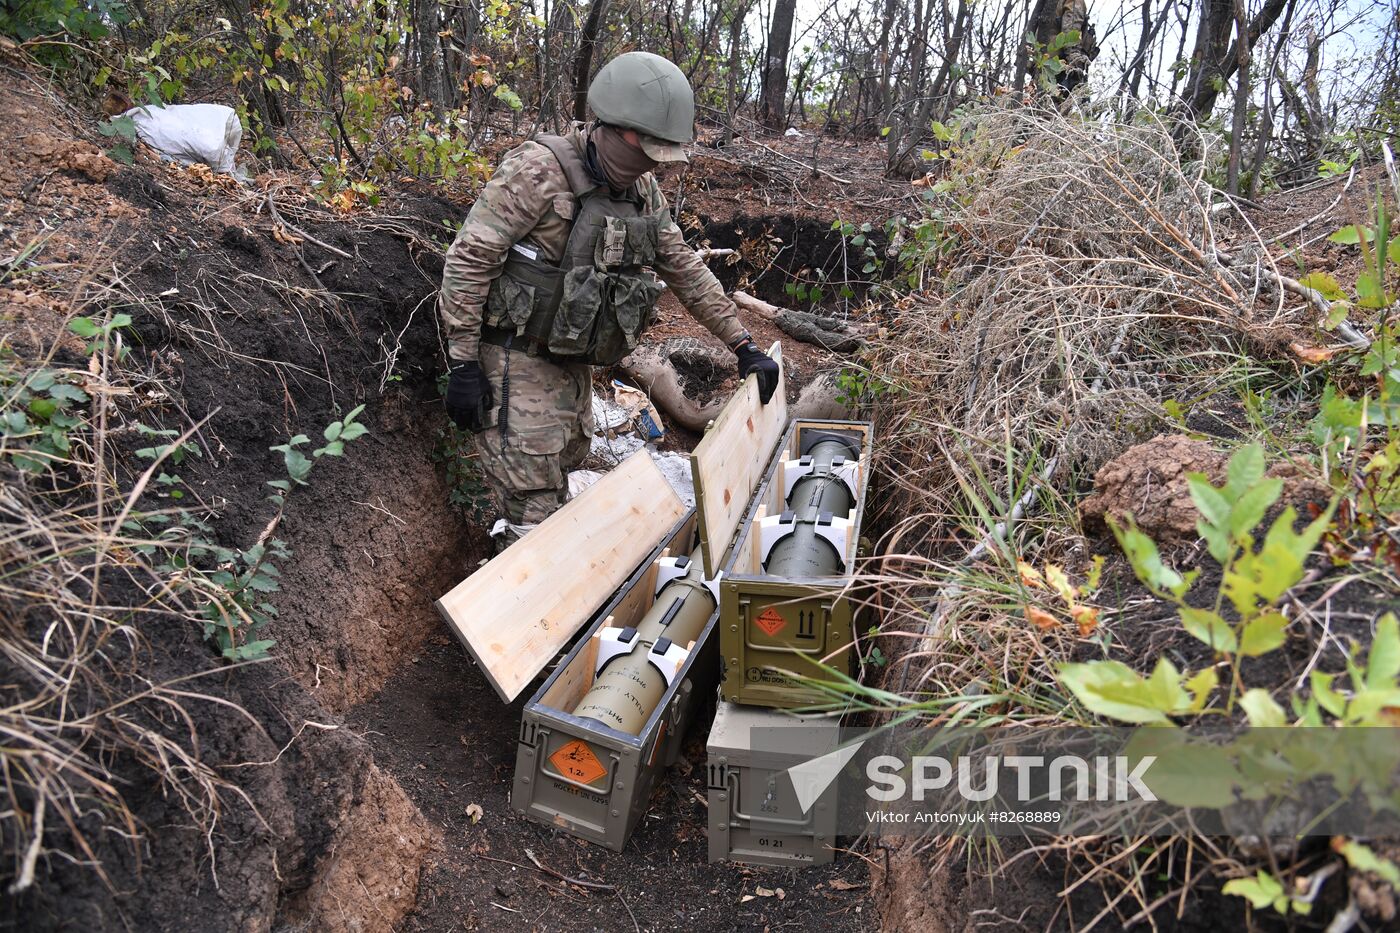 DPR Russia Ukraine Military Operation Wagner Group